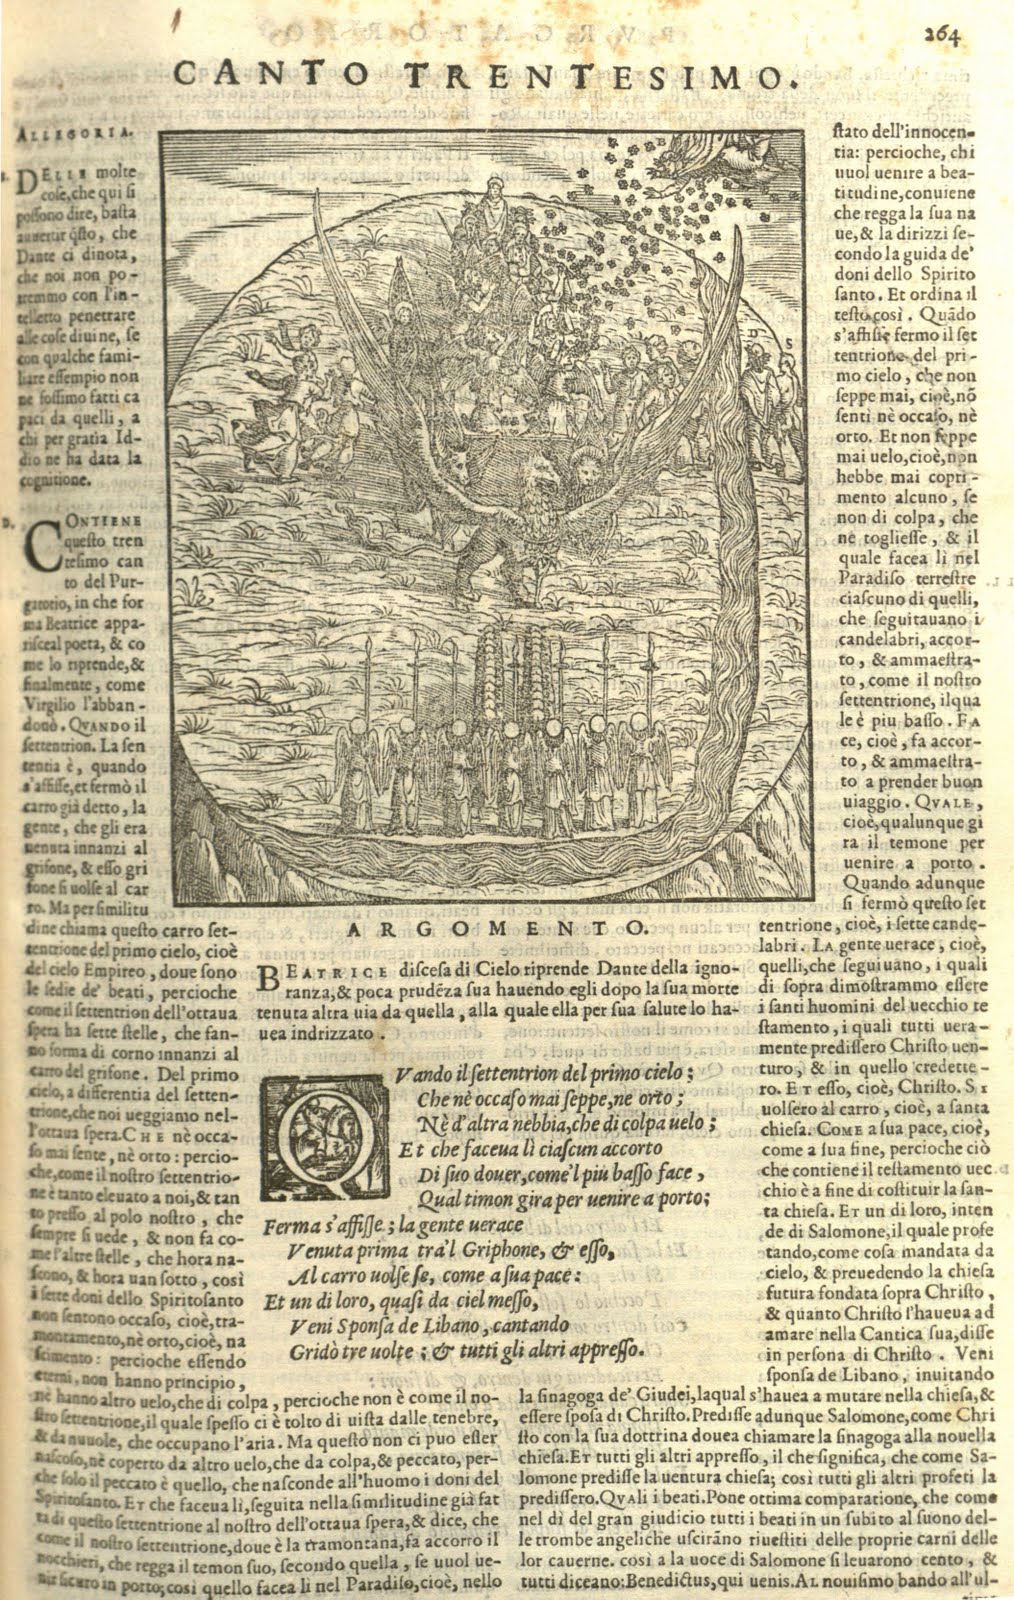 Argomento. Picture of a ship accompanies the page of text.